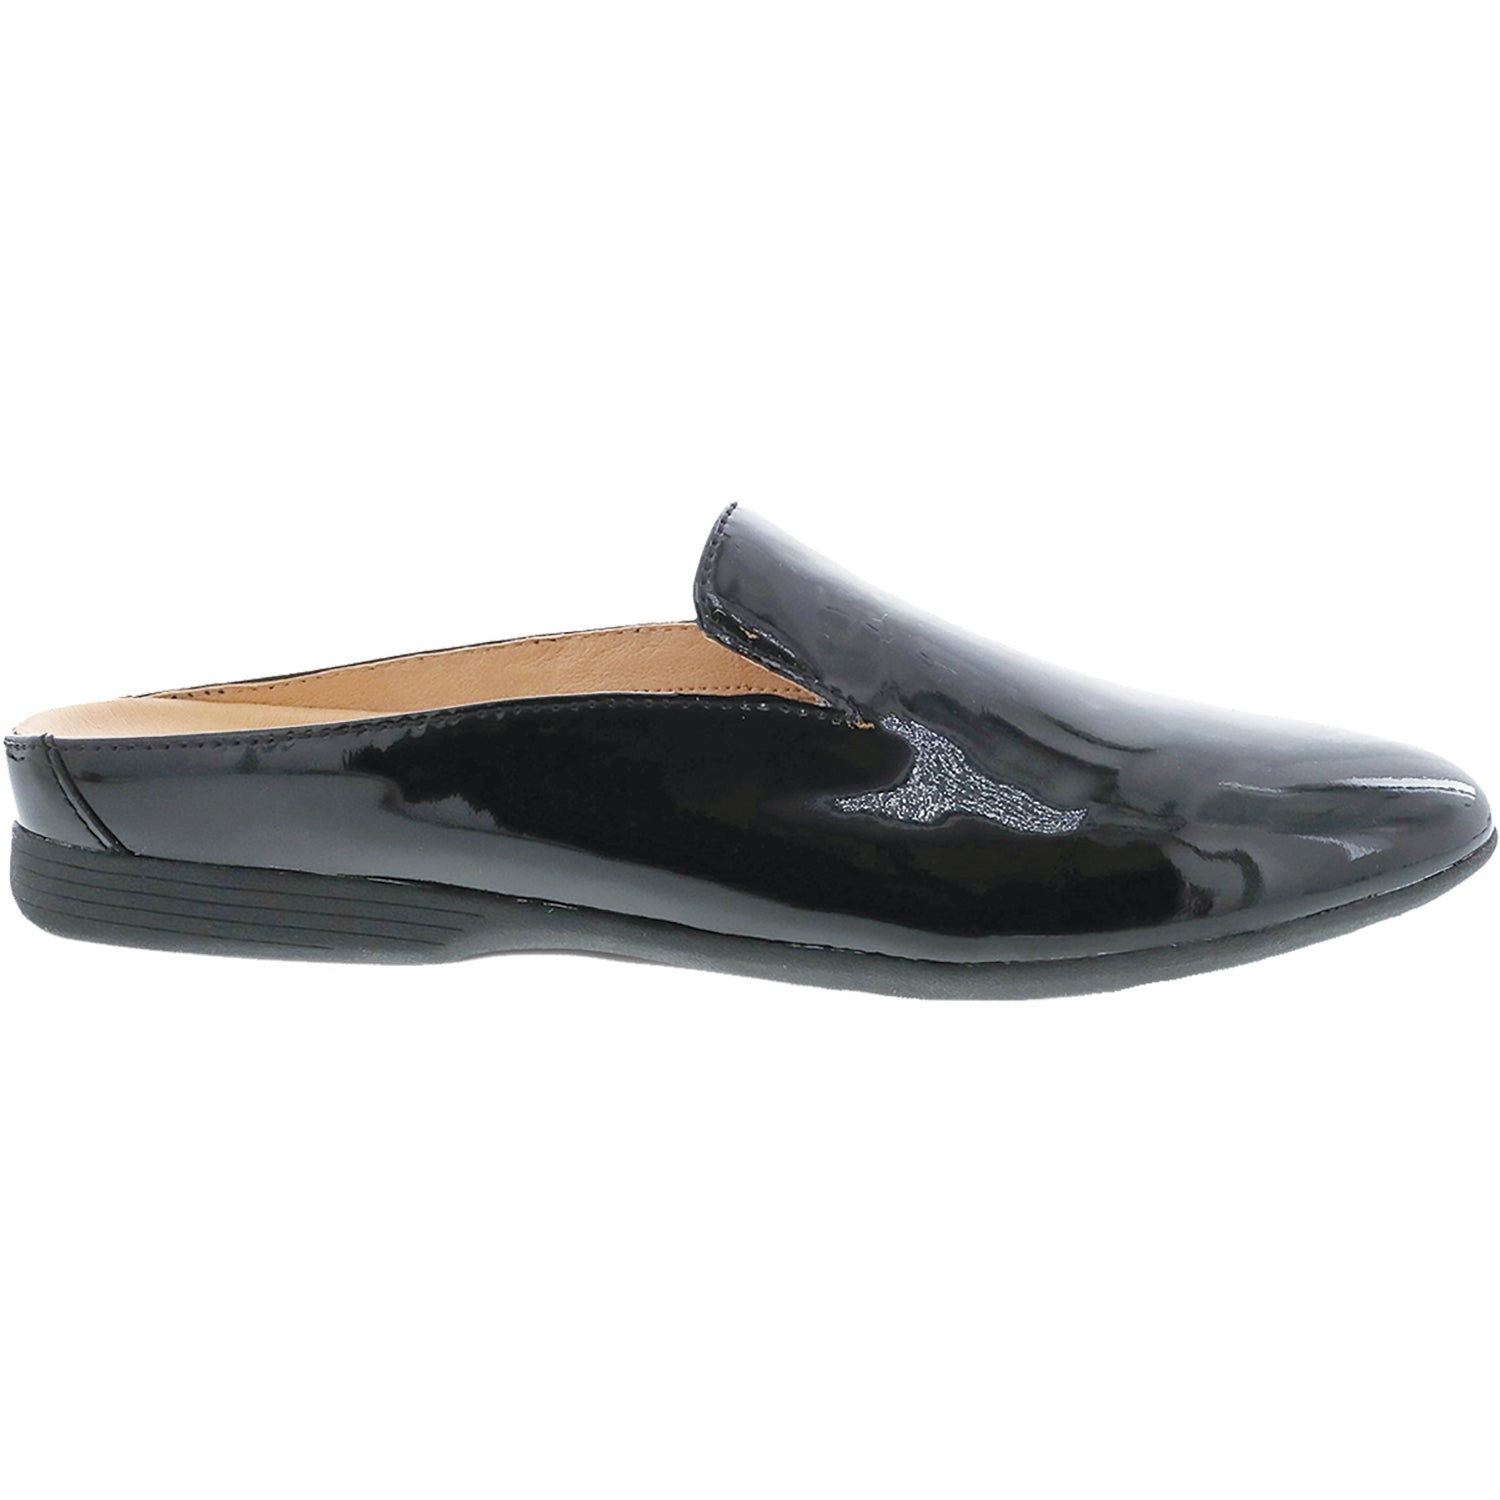 Black Patent Leather and Suede Oxford Shoes for Men | Romèro Ferrera